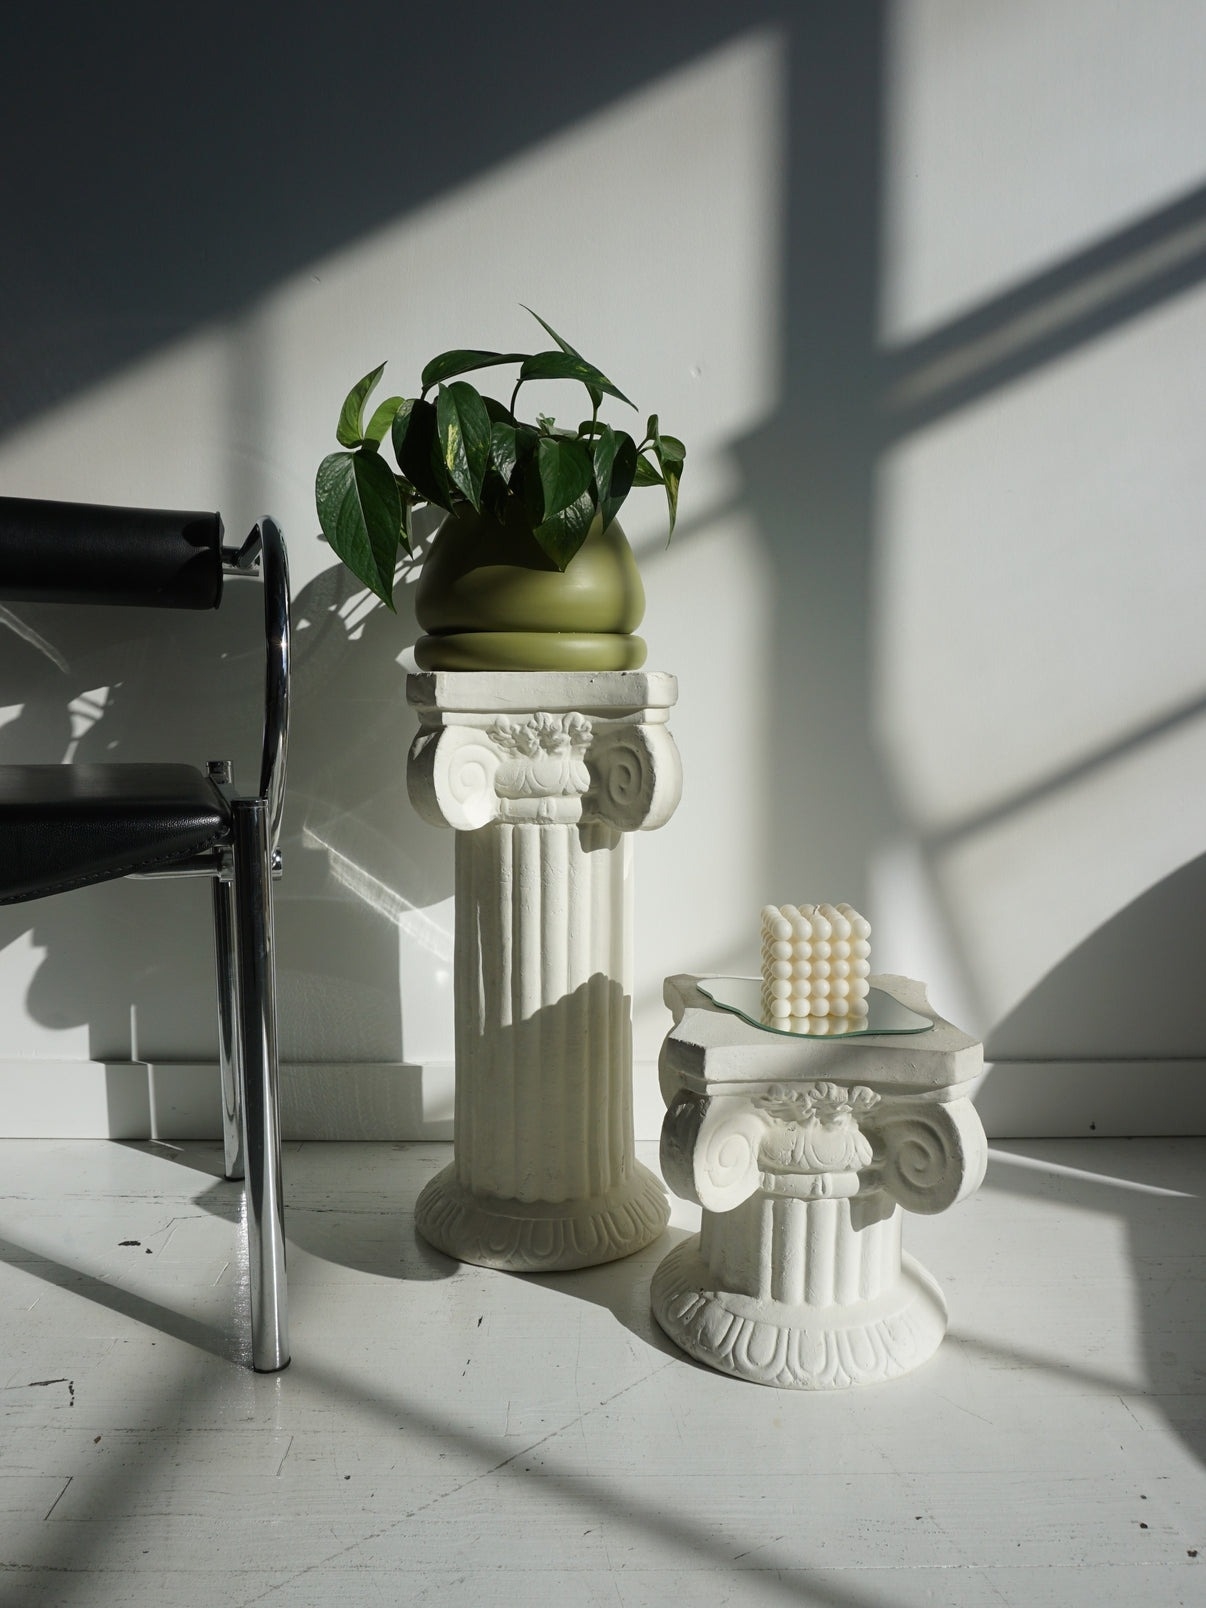 Two classical-style pedestals with a potted plant and decorative beads in a shadow-patterned room